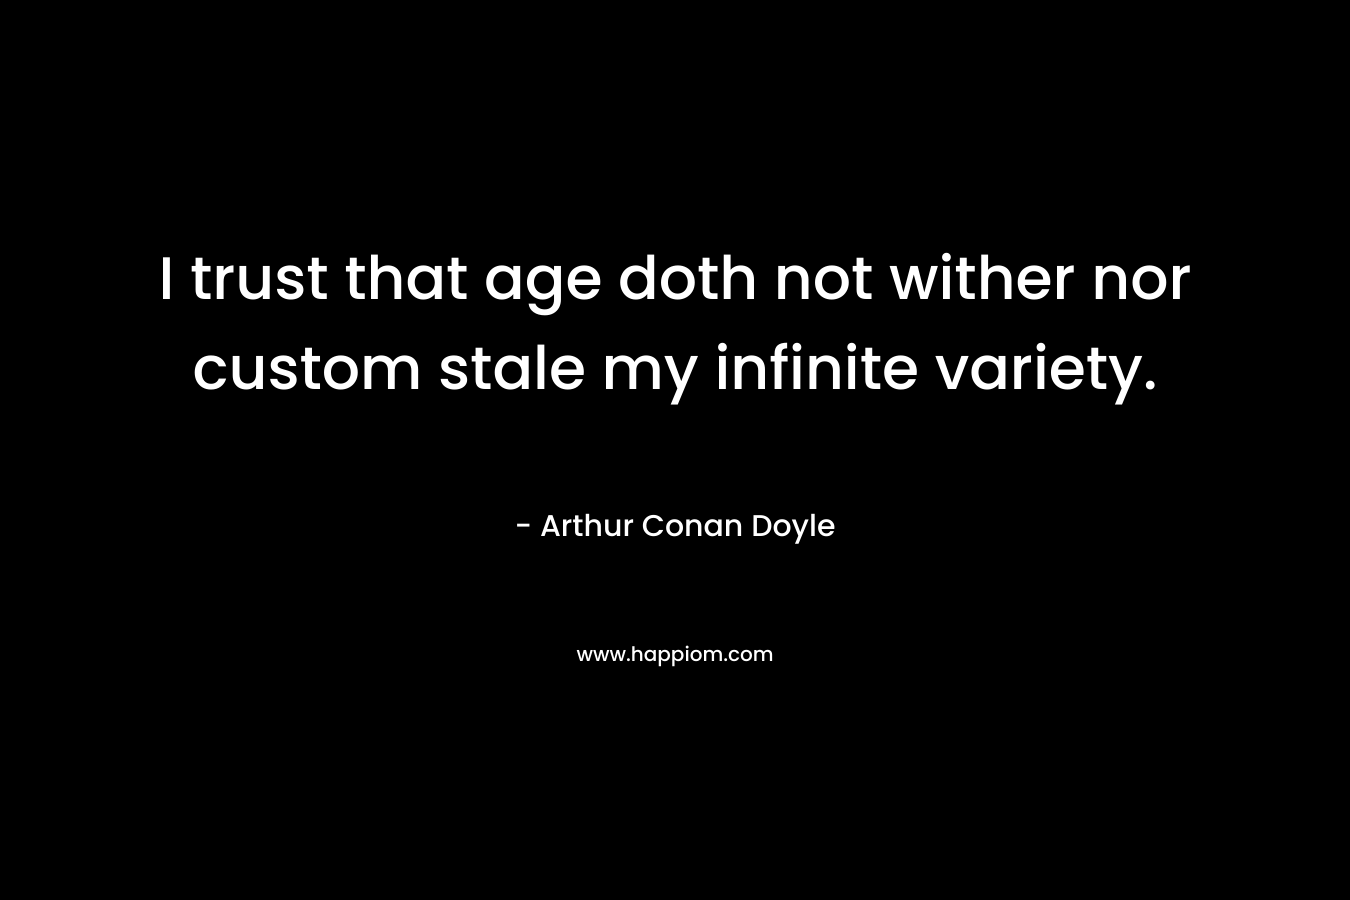 I trust that age doth not wither nor custom stale my infinite variety. – Arthur Conan Doyle